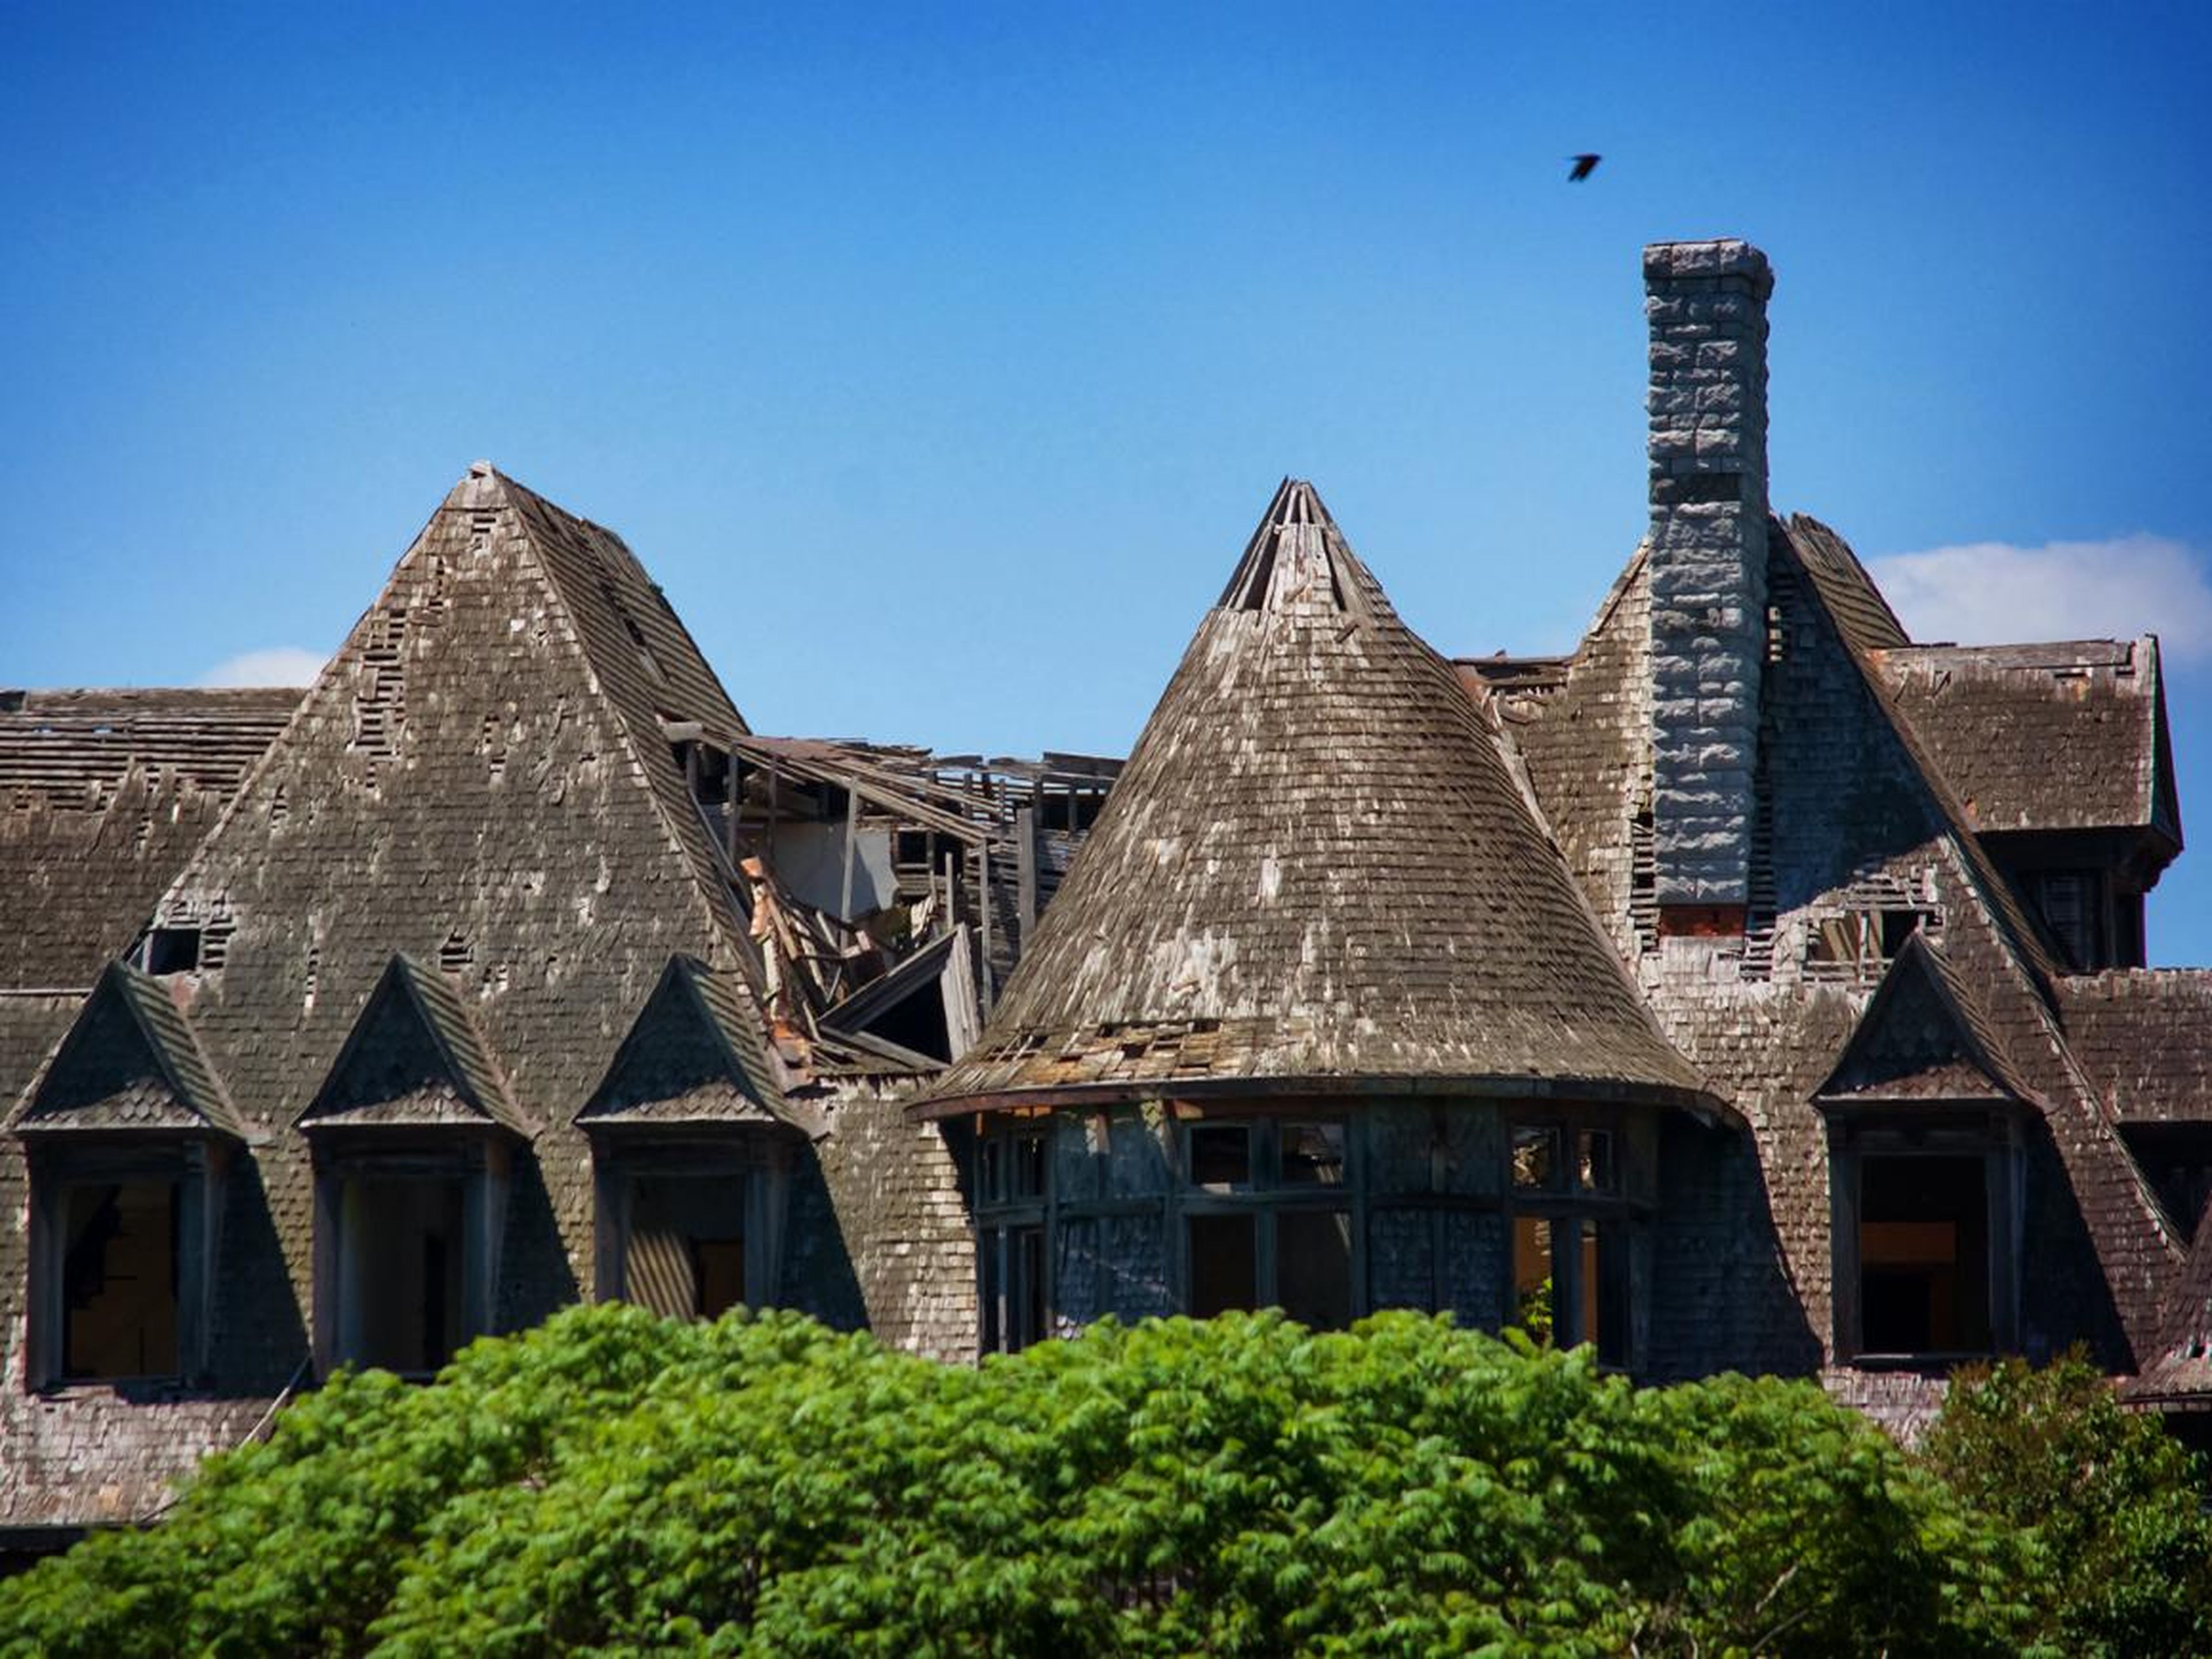 The mansion is now for sale for $495,000 — but whoever buys it will certainly need to spend much more than that on repairs and restoration.